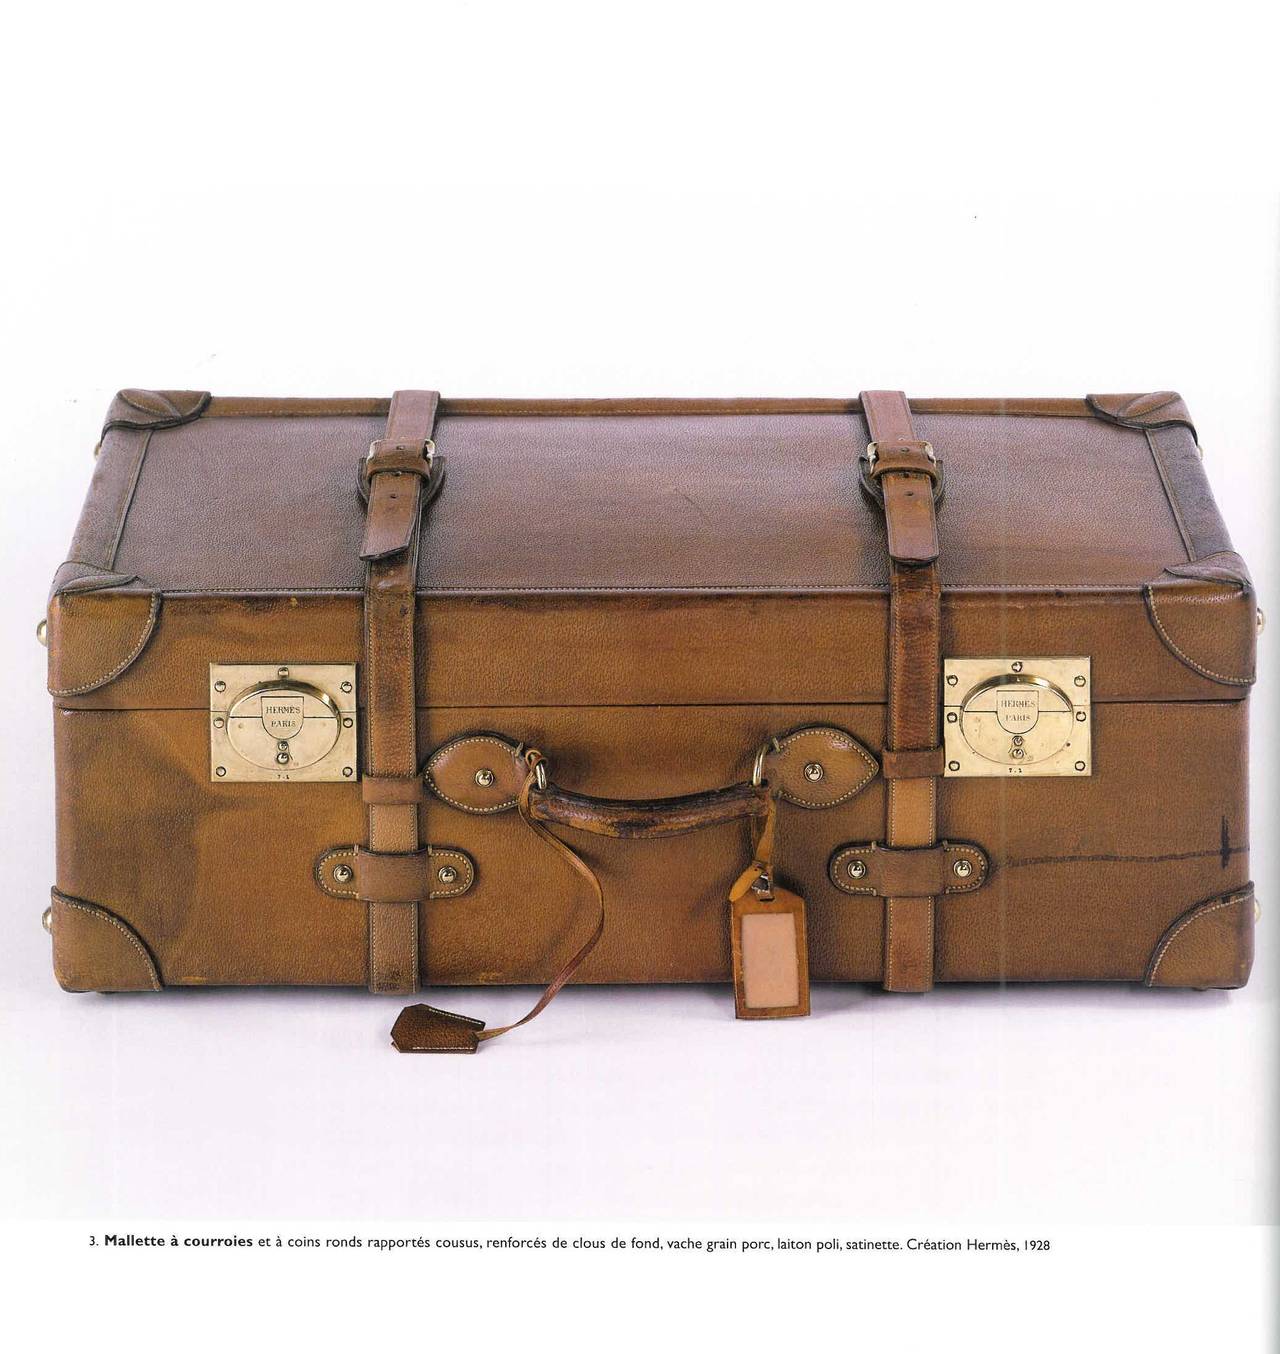 This beautifully presented book illustrates the collection of luxurious travel objects made by the world-famous brand Hermes. In the latter years of the 19th century Emile Hermes travelled around the world putting together a collection of travel